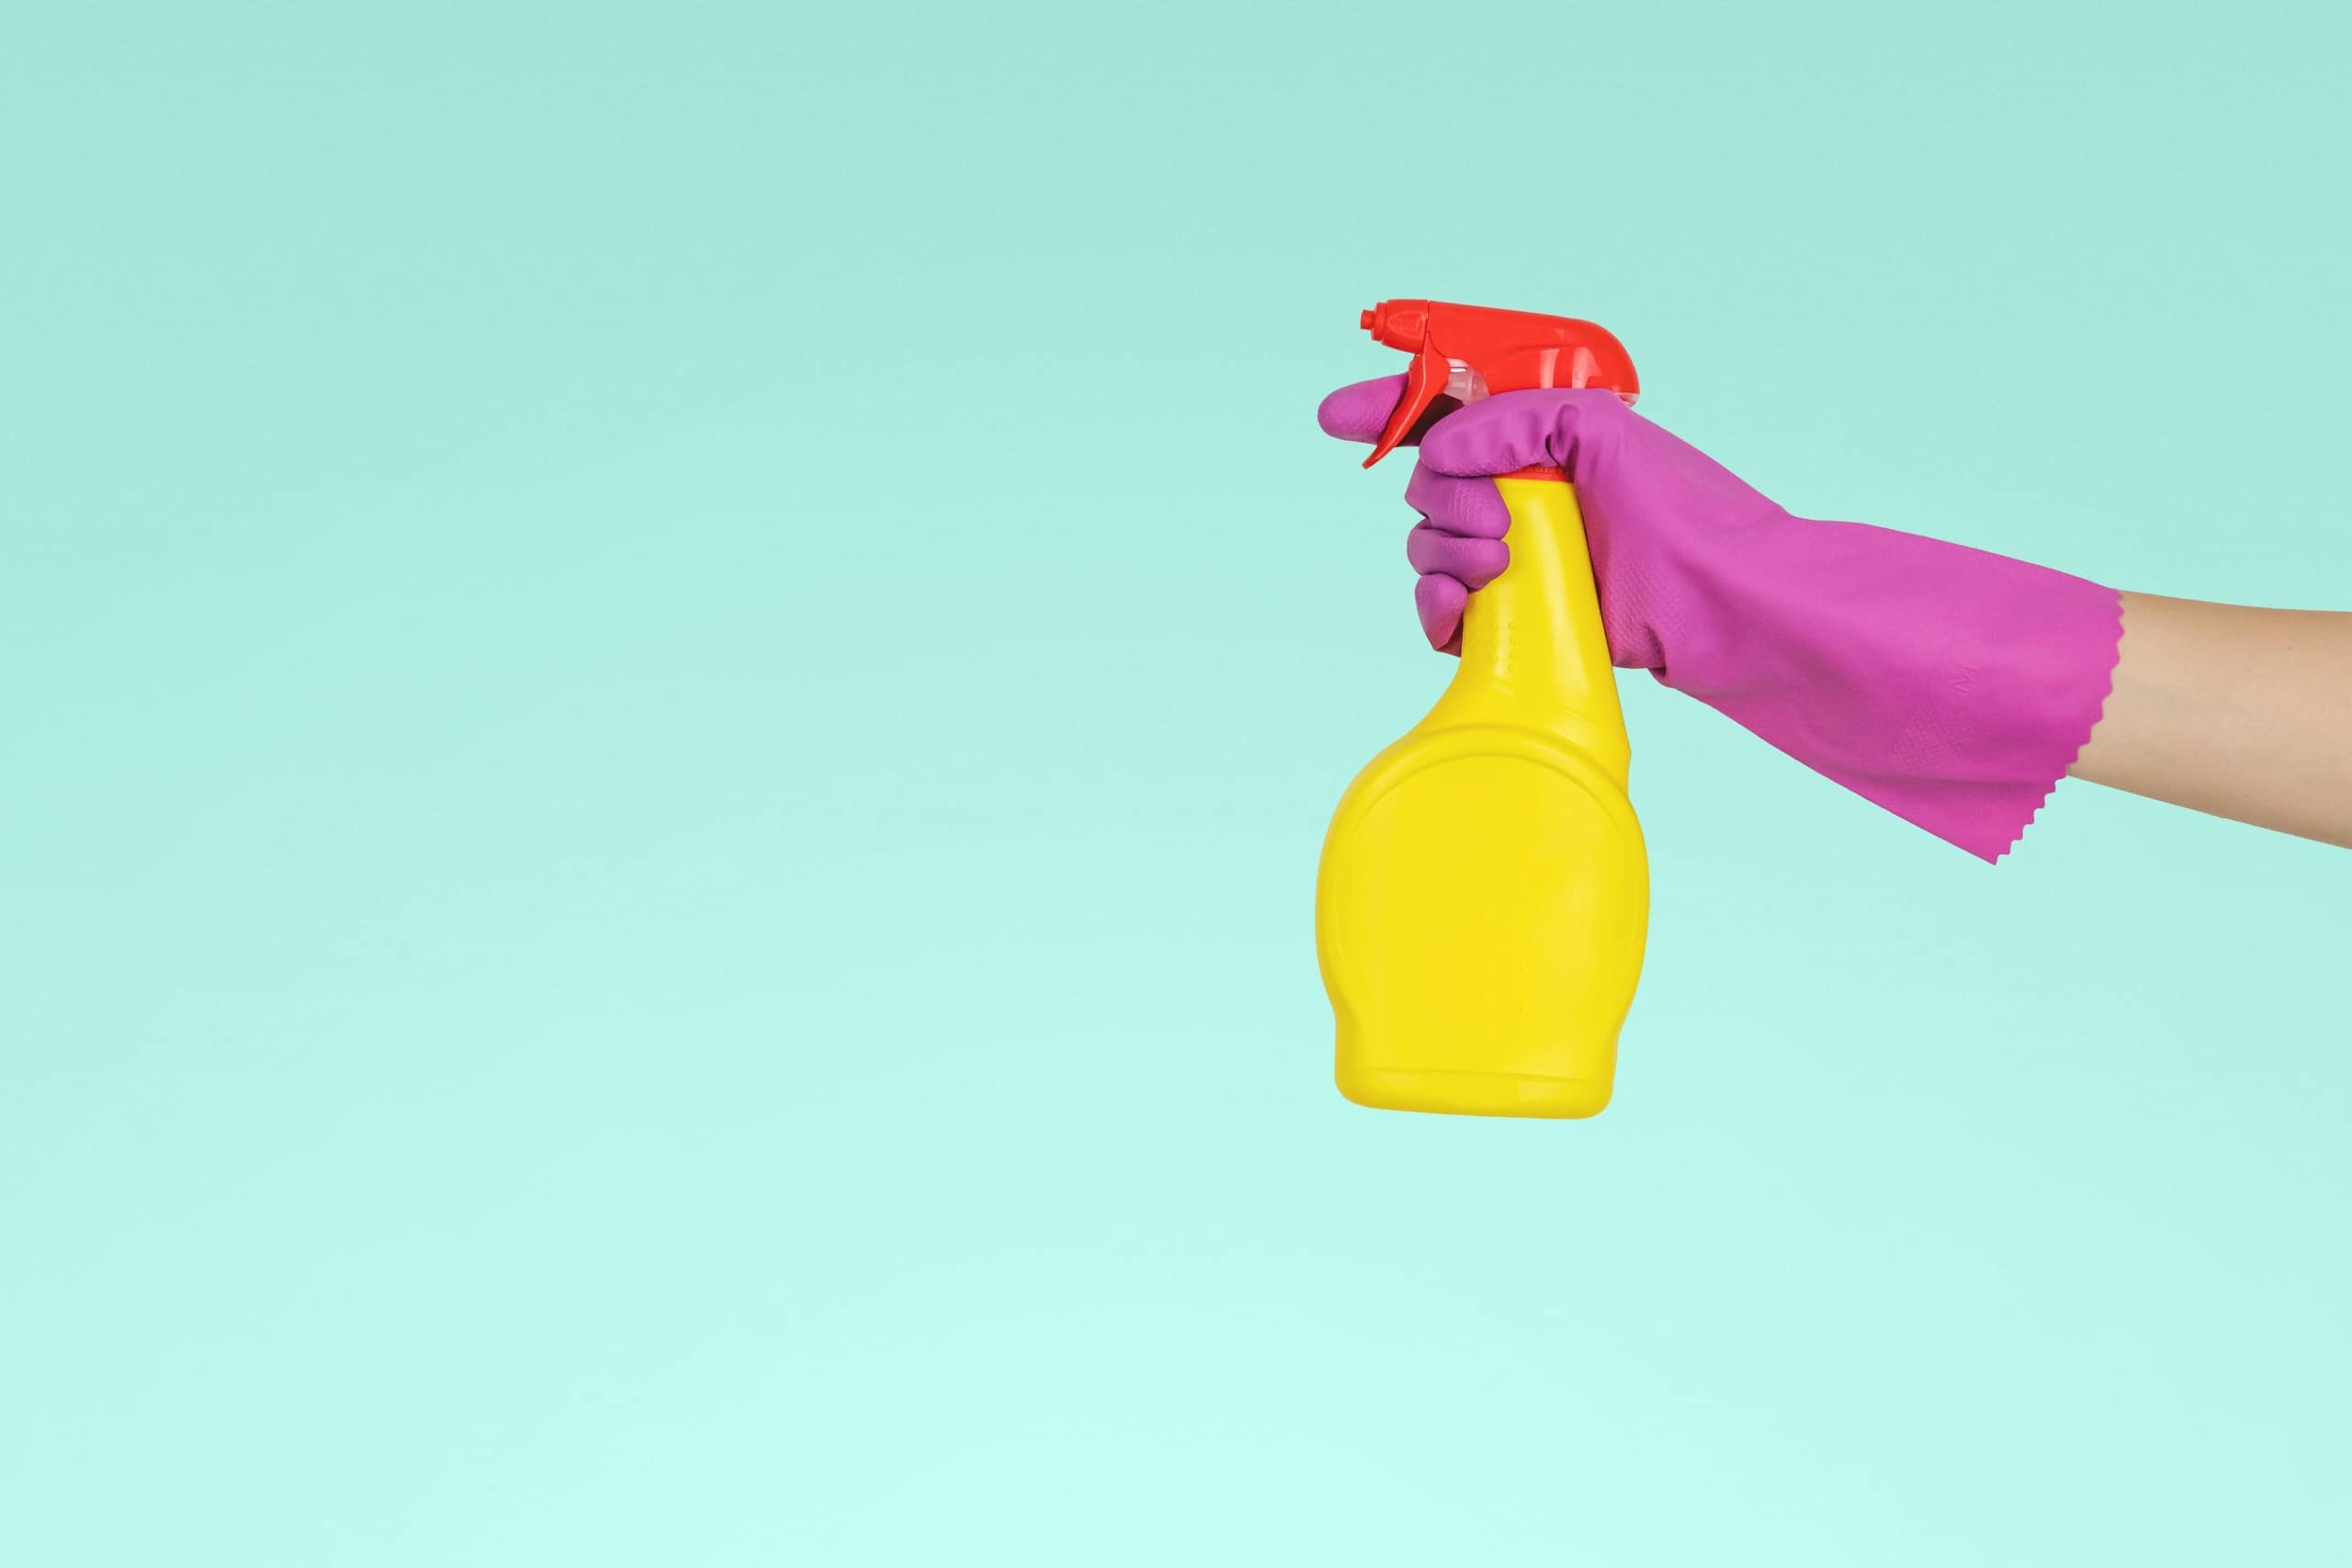 yellow spray bottle in a pink gloved hand on a periwinkle blue background